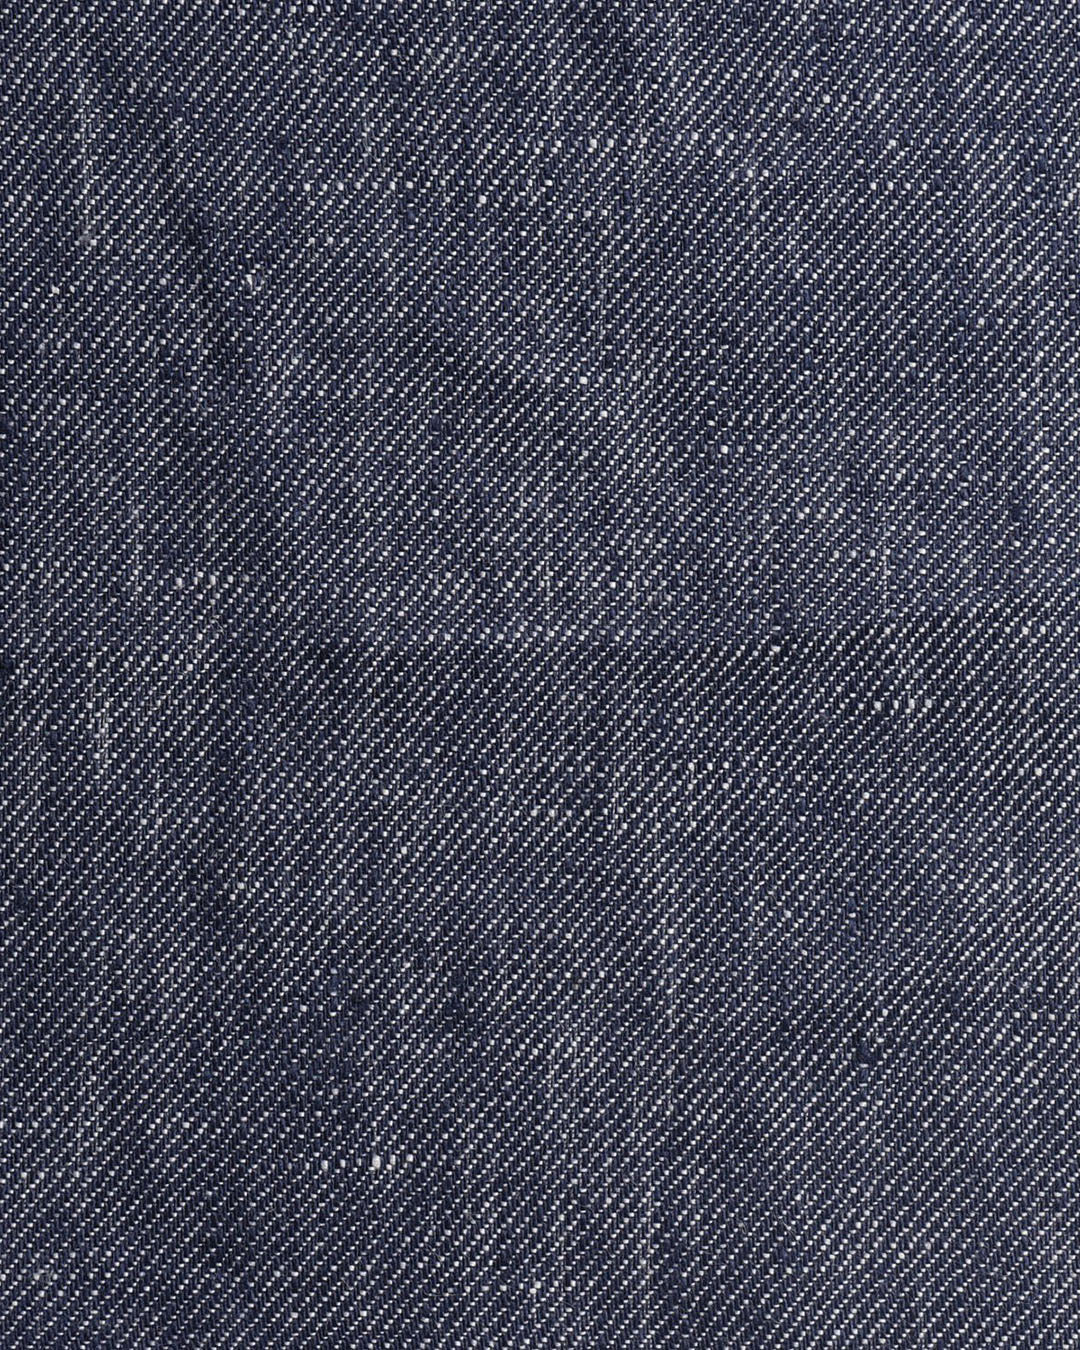 Close up view of custom linen pants for men by Luxire in denim blue